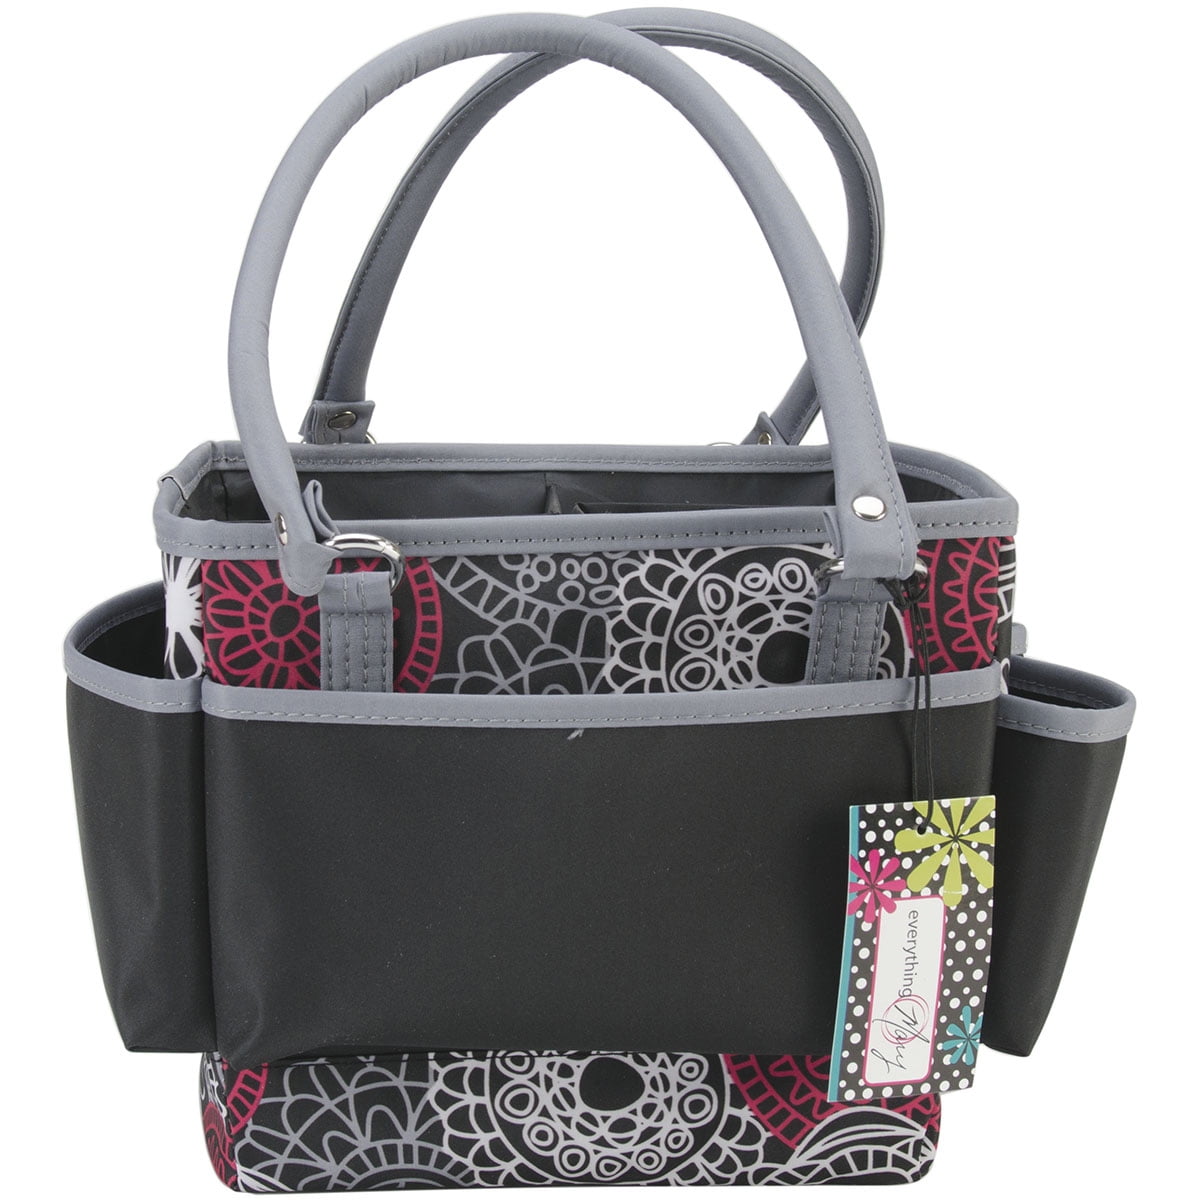 Storage Studios Large Utility Tote, 10.5" x 20.5" x 11", Pink and Grey